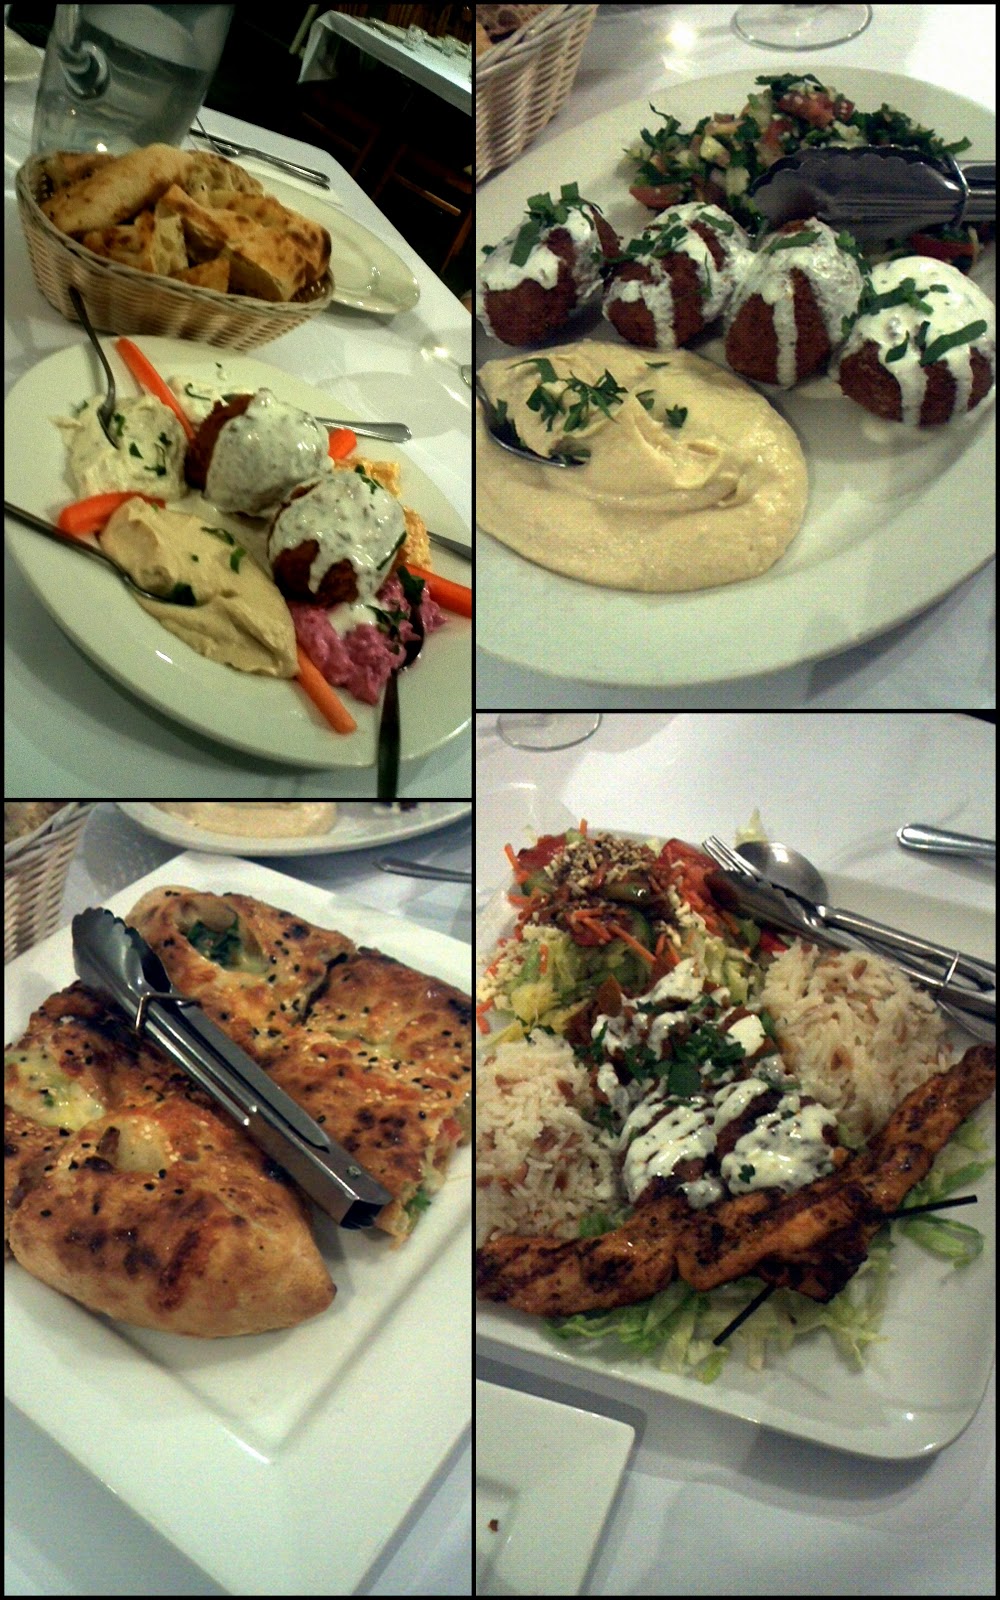 Anthea's eats: turkish feast - lunch and dinner